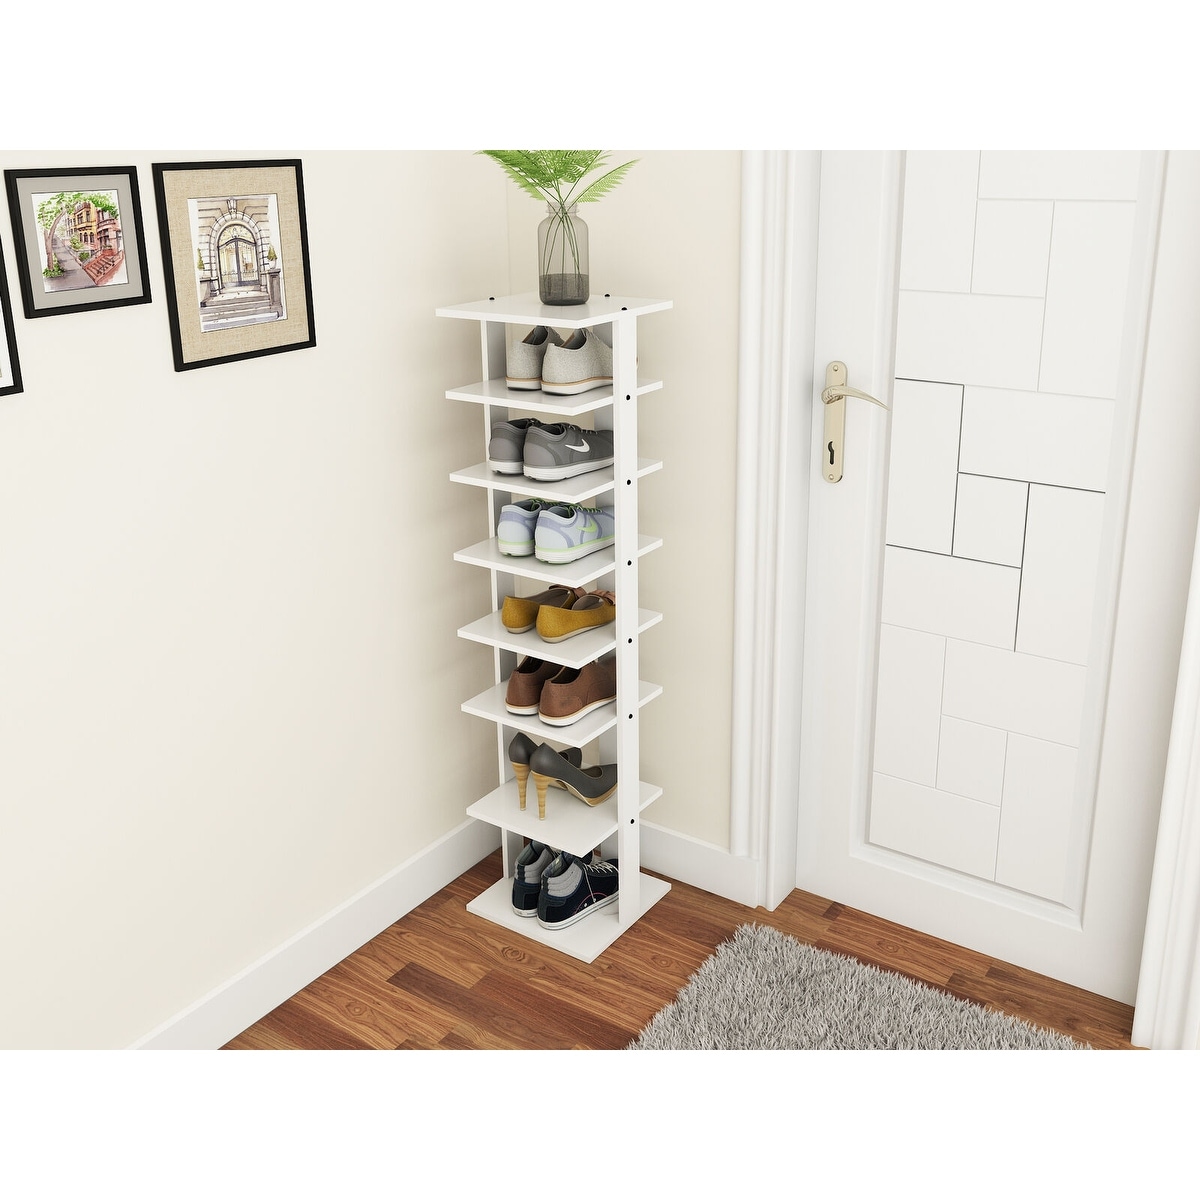 10 Space-Saving Drying Racks for Small Spaces - Living in a shoebox